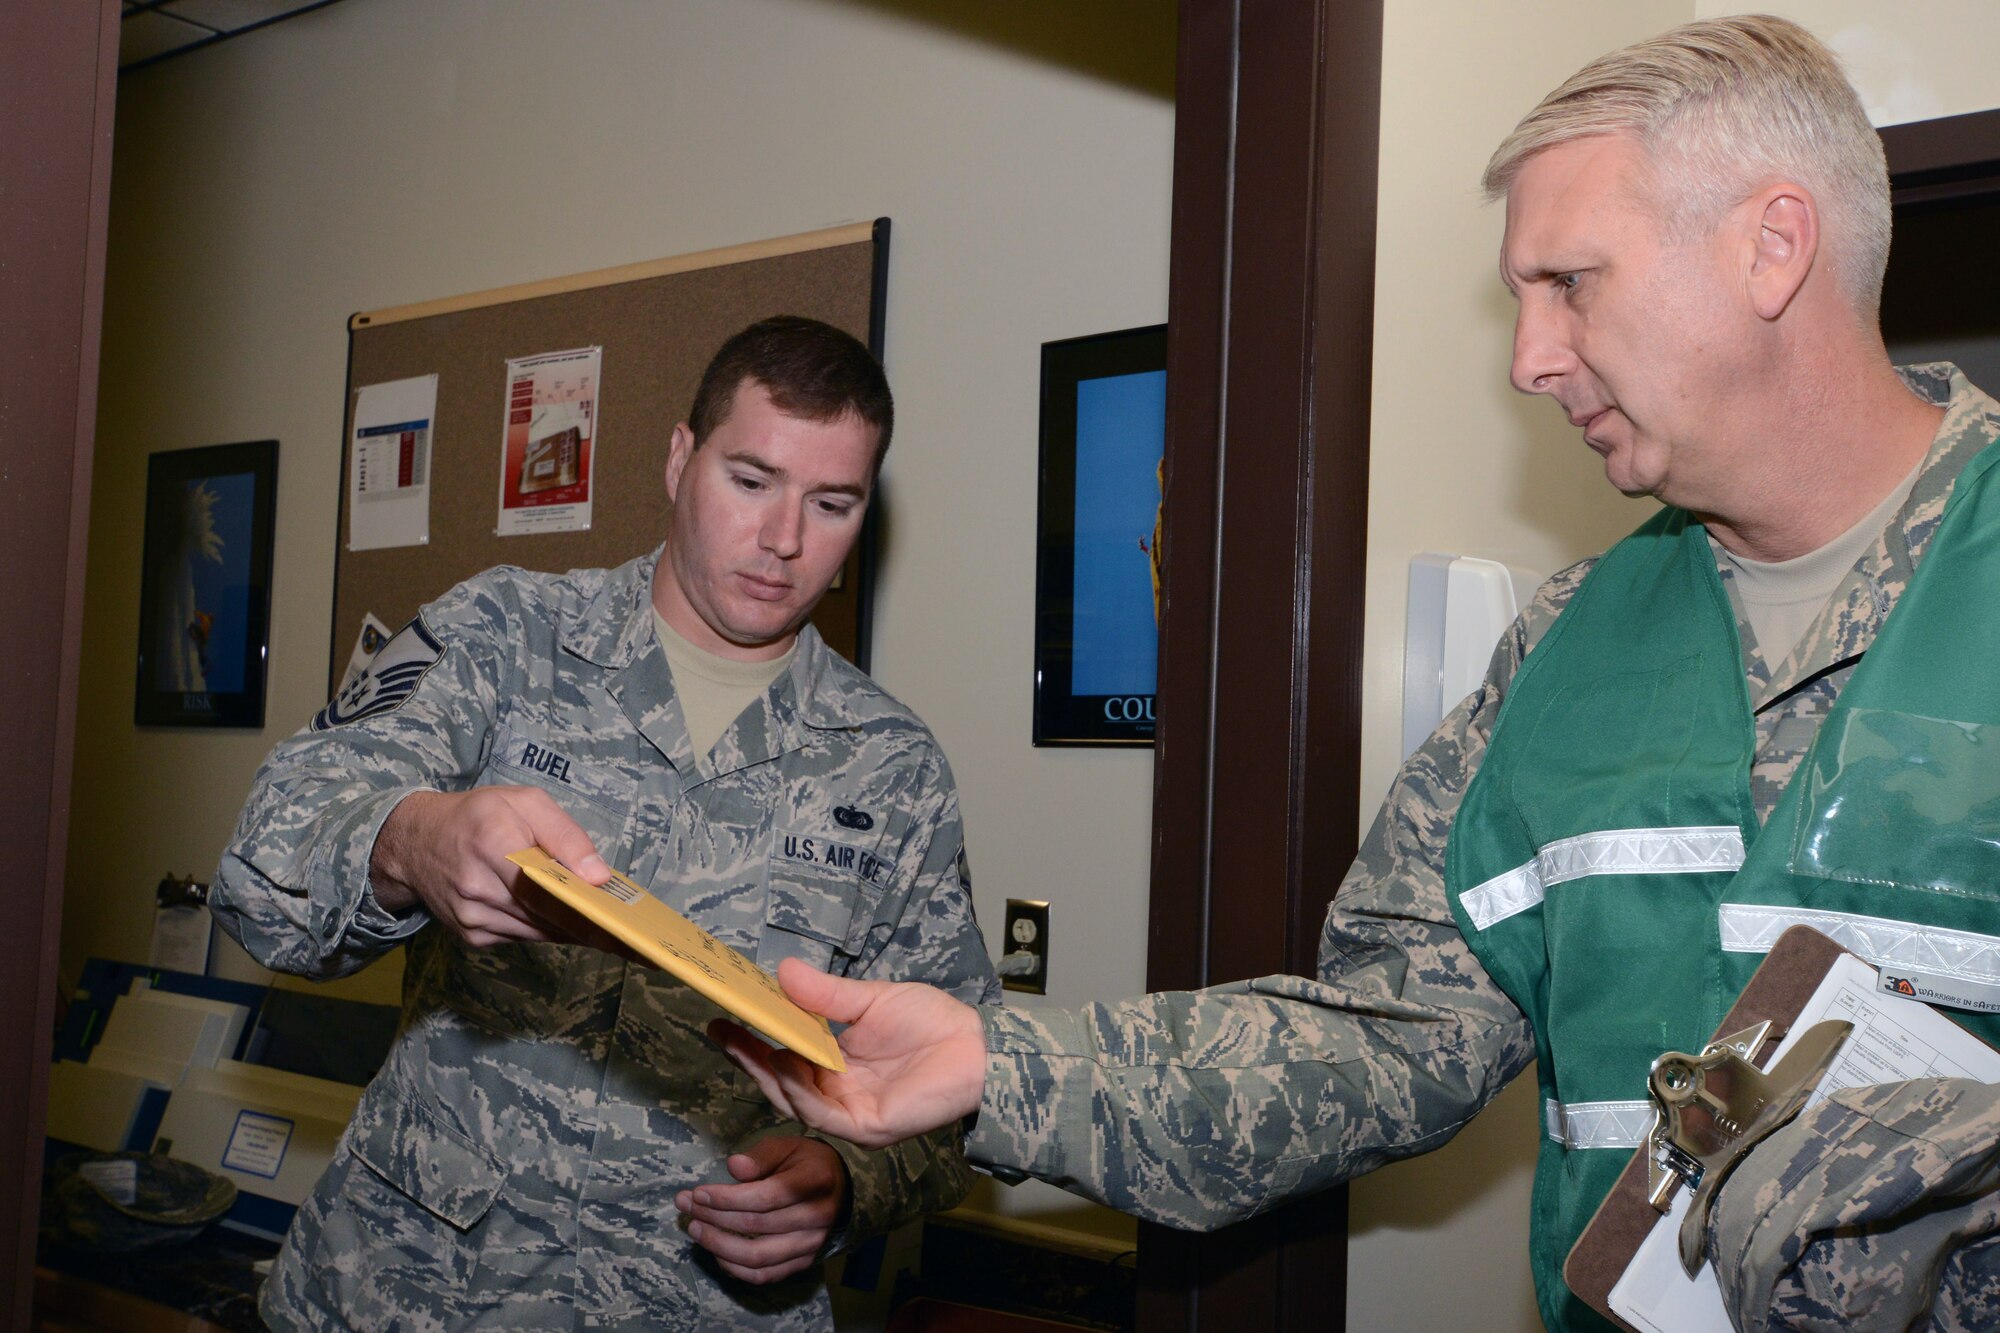 Master Sgt. Kevin Ruel, knowledge operations manager with the 103rd Operations Group, identifies a package containing a simulated hazardous material and points out indicators common to real-world suspicious packages to Lt. Col. James Guerrera of the 103rd Airlift Wing’s inspector general’s office during the wing’s annual suspicious package exercise at Bradley Air National Guard Base, East Granby, Conn., Aug. 14, 2014.  (U.S. Air National Guard photo by Master Sgt. Erin McNamara)